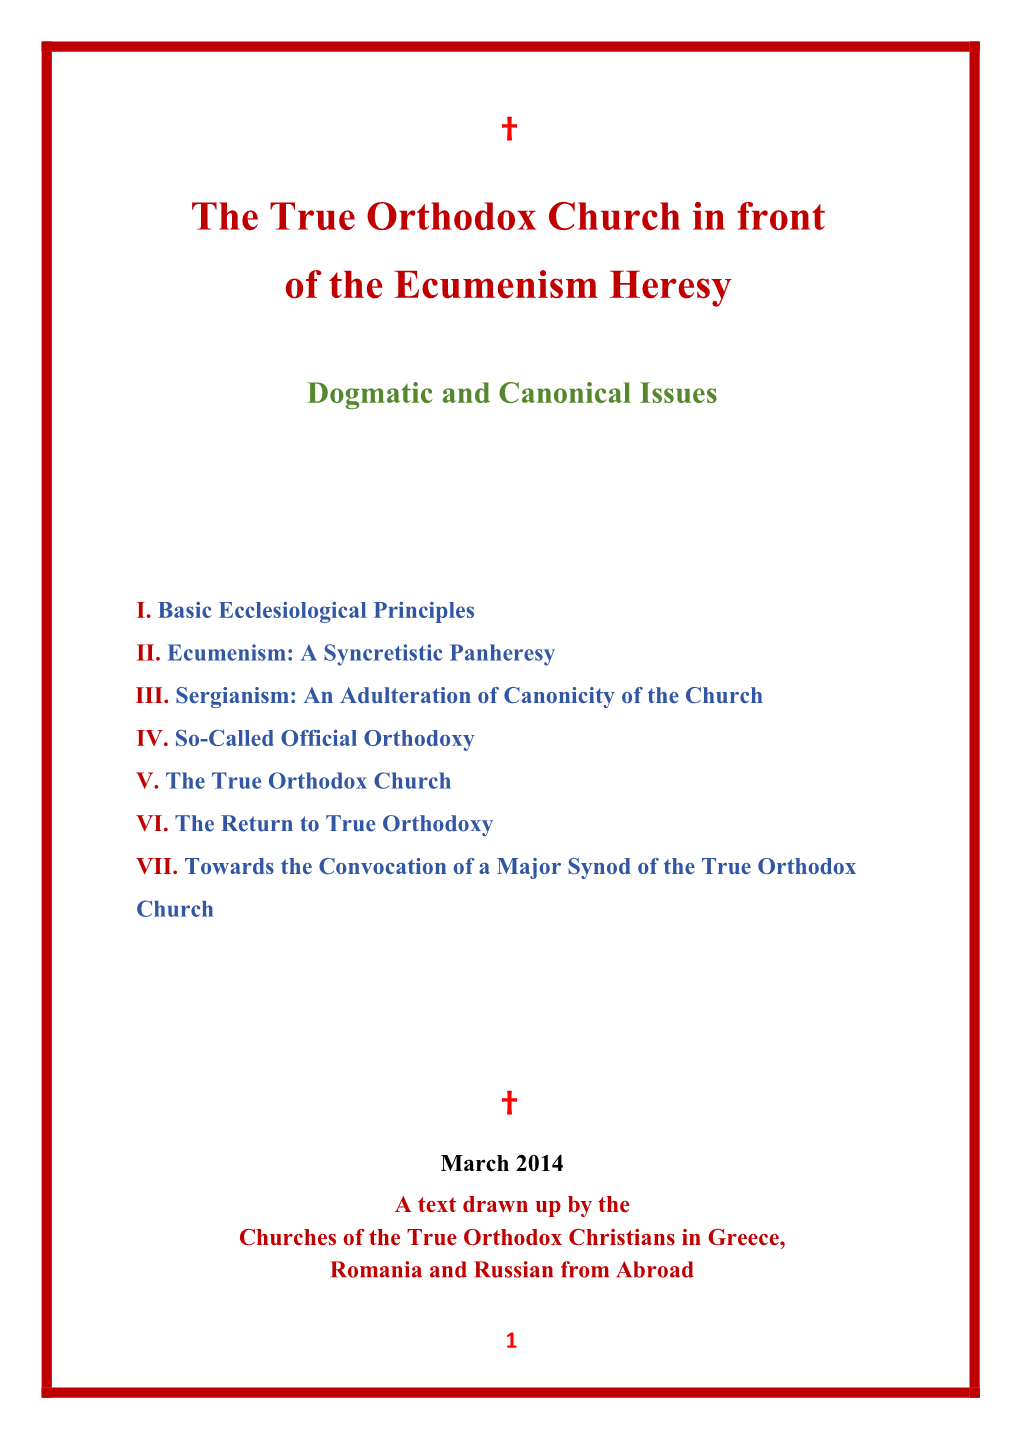 The True Orthodox Church in Front of the Ecumenism Heresy